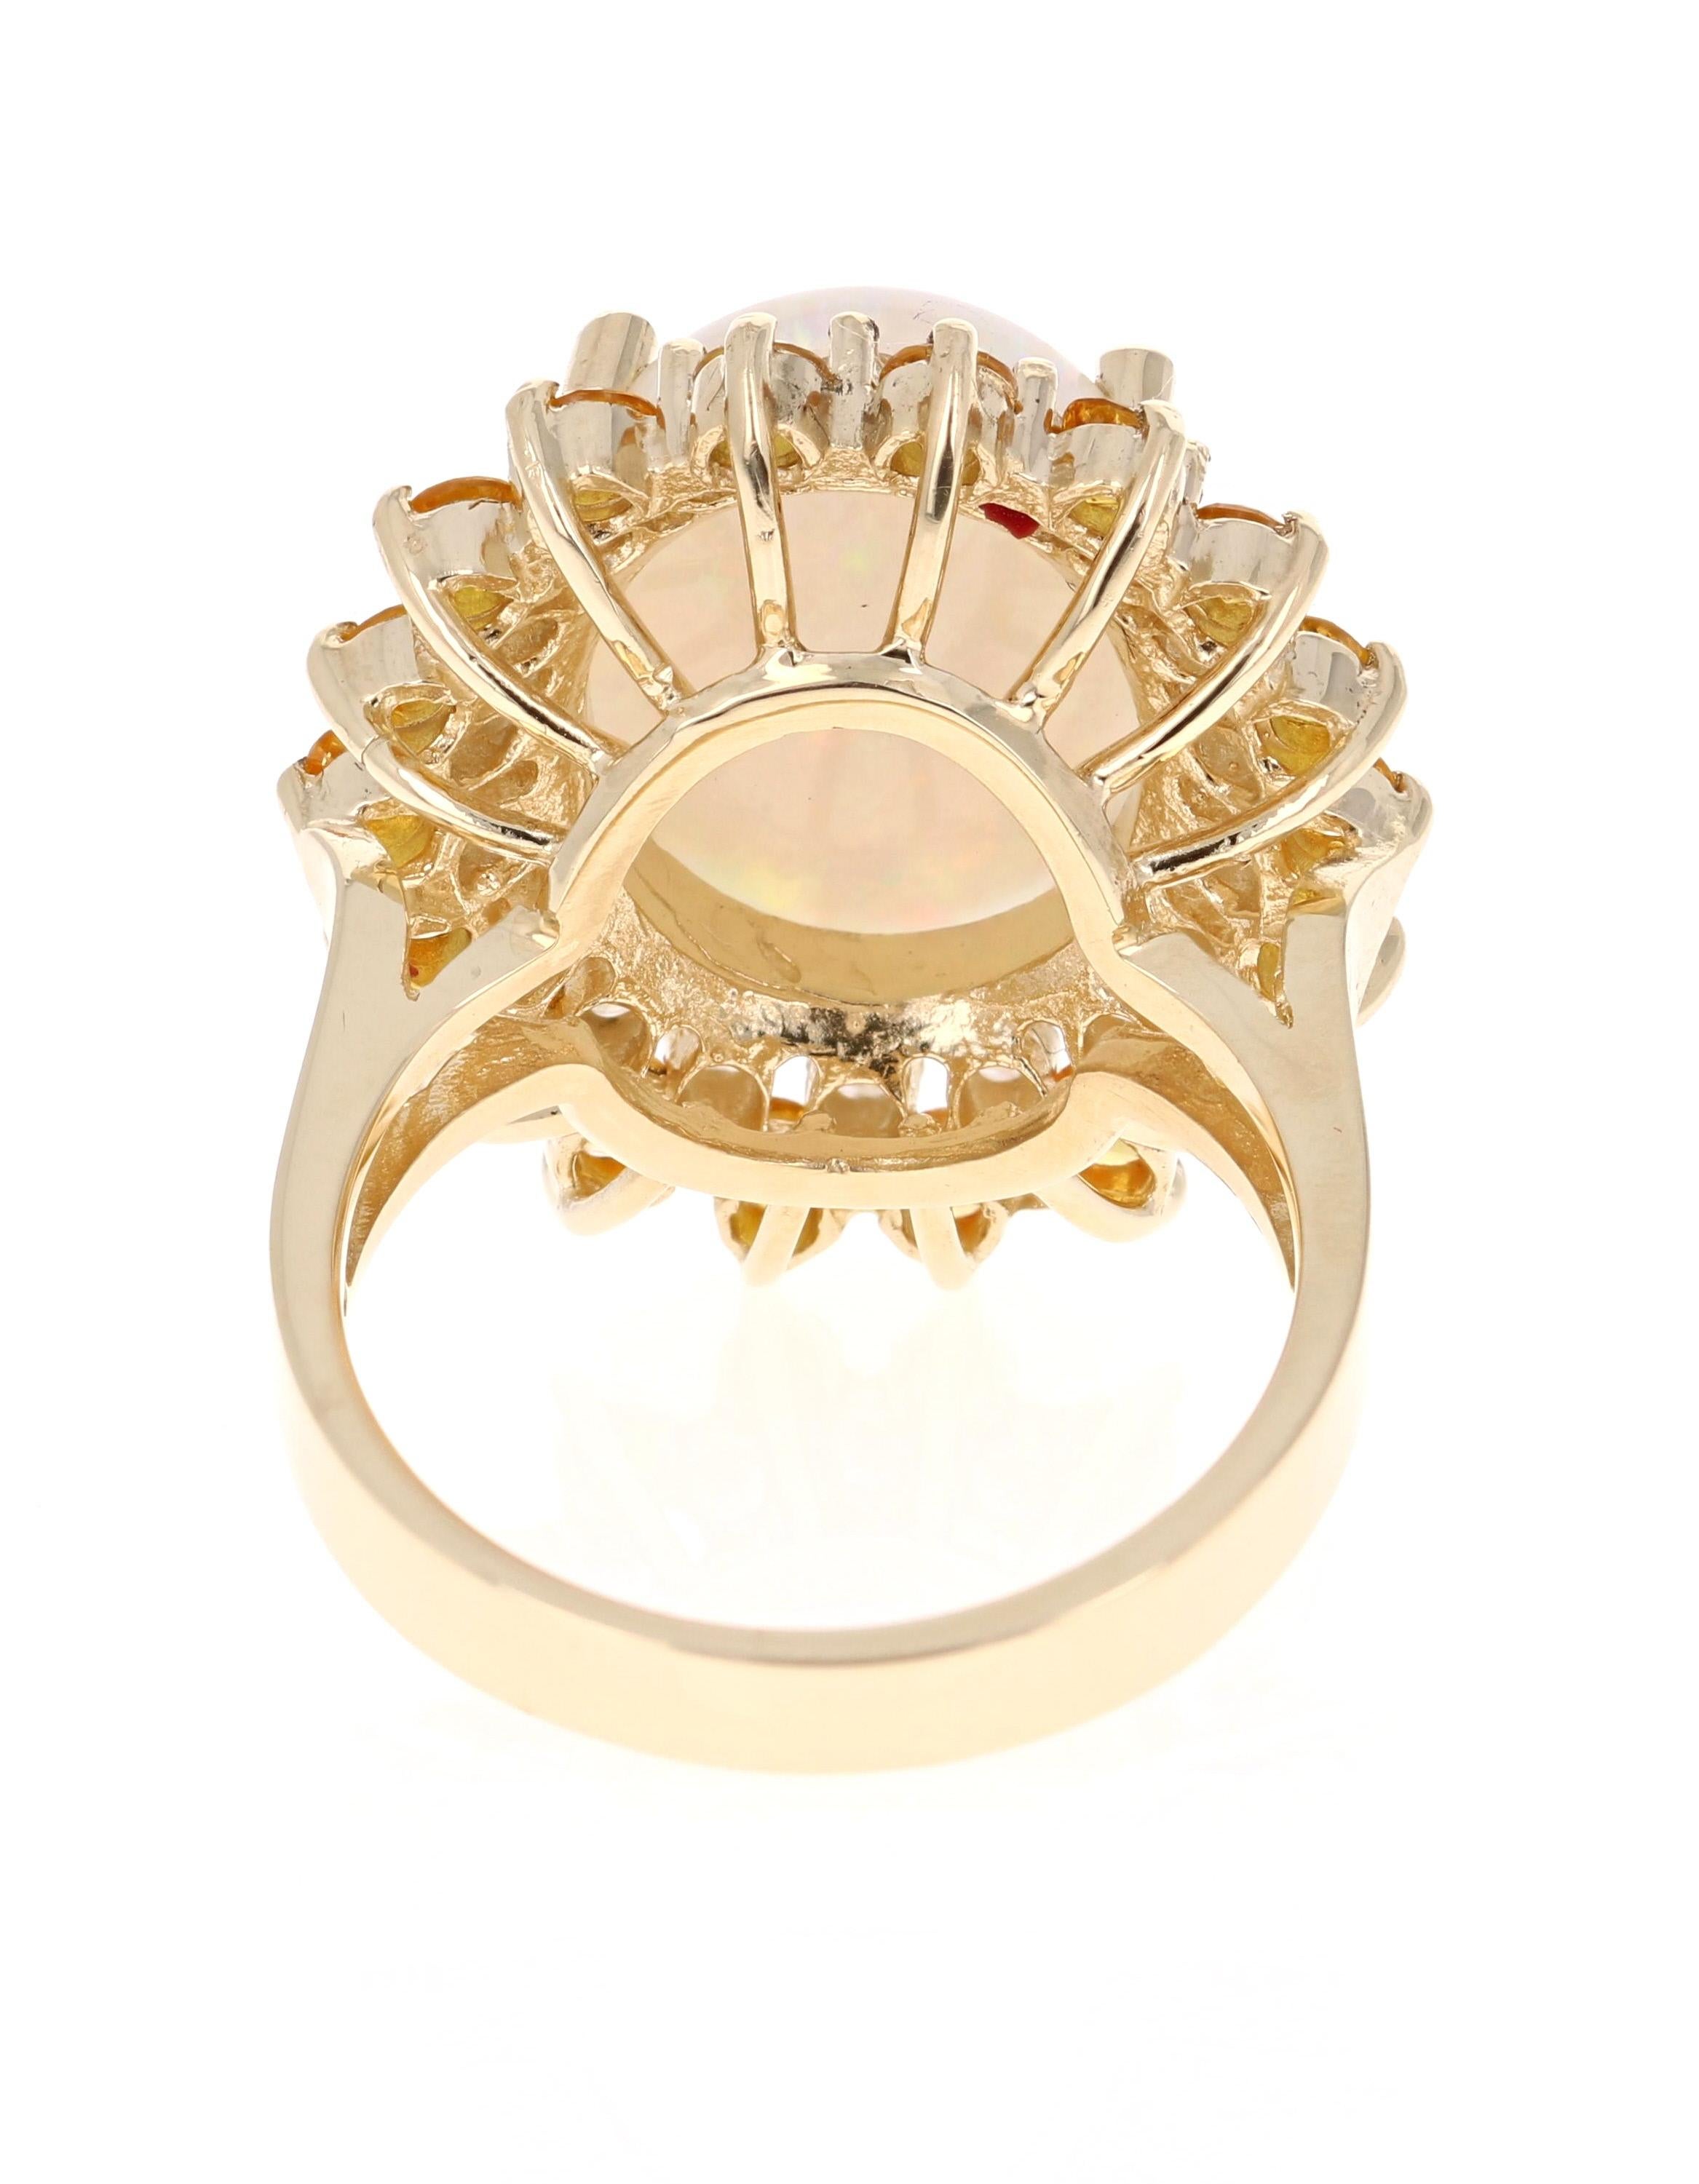 Contemporary 7.64 Carat Opal Yellow Sapphire and Diamond 14 Karat Yellow Gold Cocktail Ring For Sale